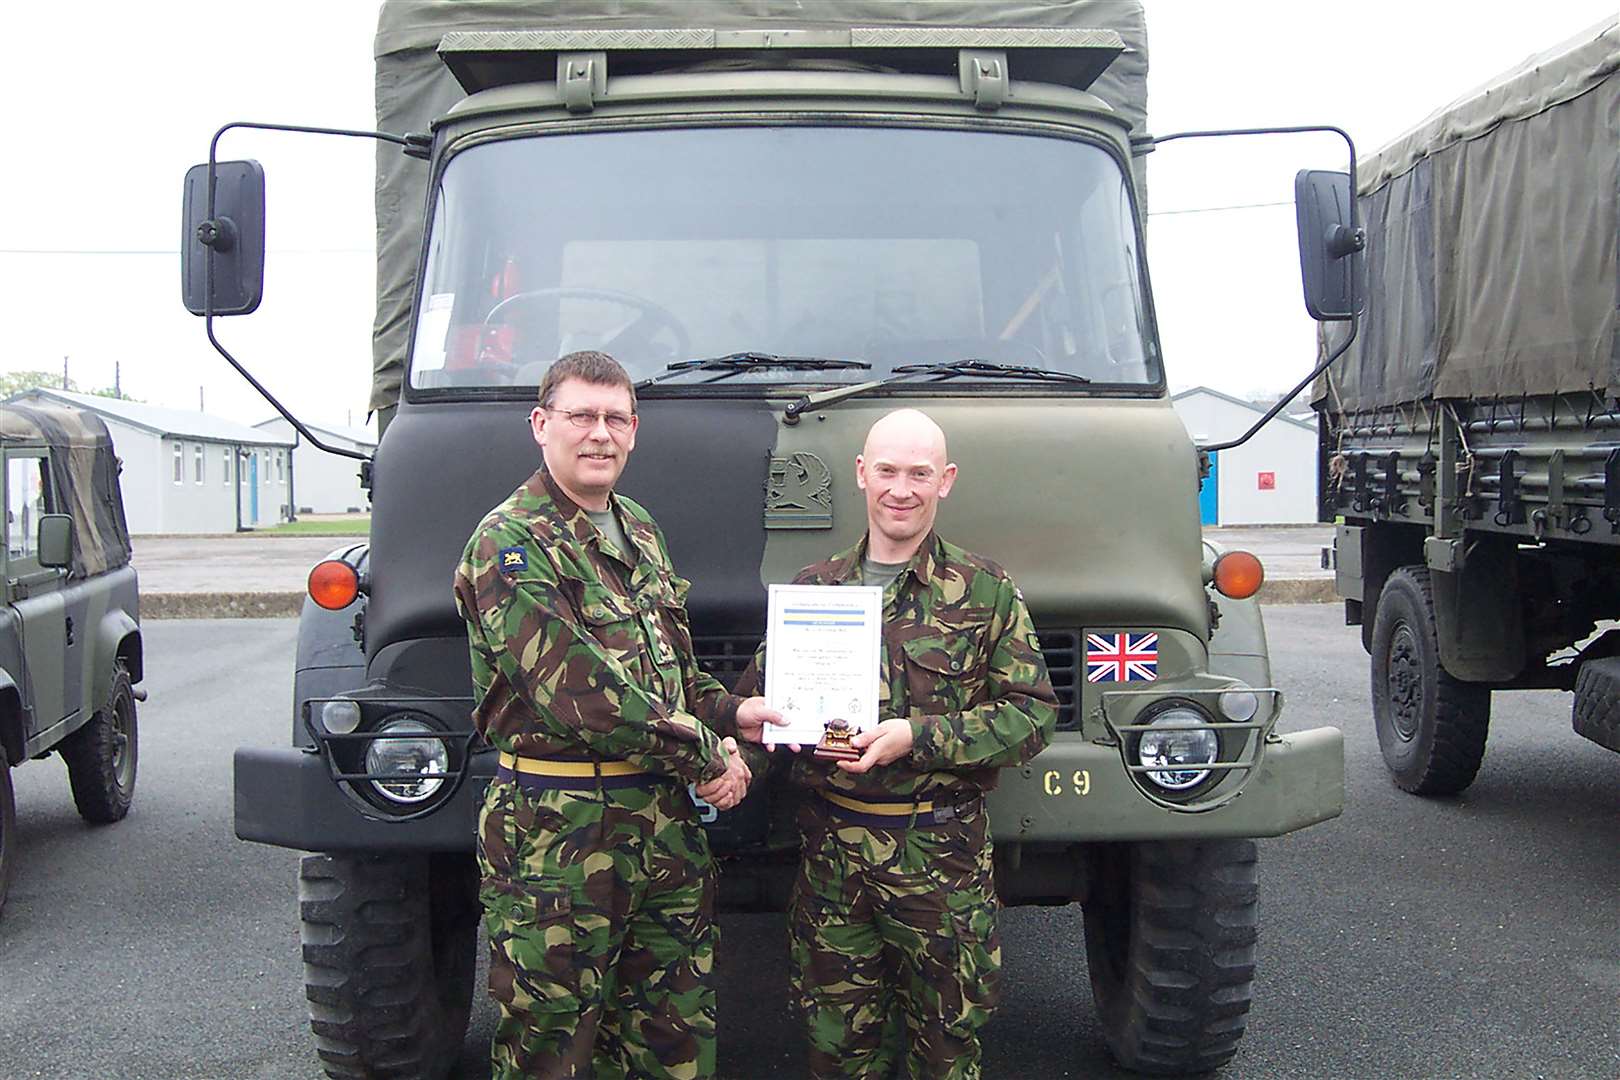 Wayne Couzens (right) was a Private from C Company, 3 PWWR with his certificate for passing out as top student on the Battalion-run driving course. Copyright.Emily Caroe MIPR.The Bennett-Caroe Partnership